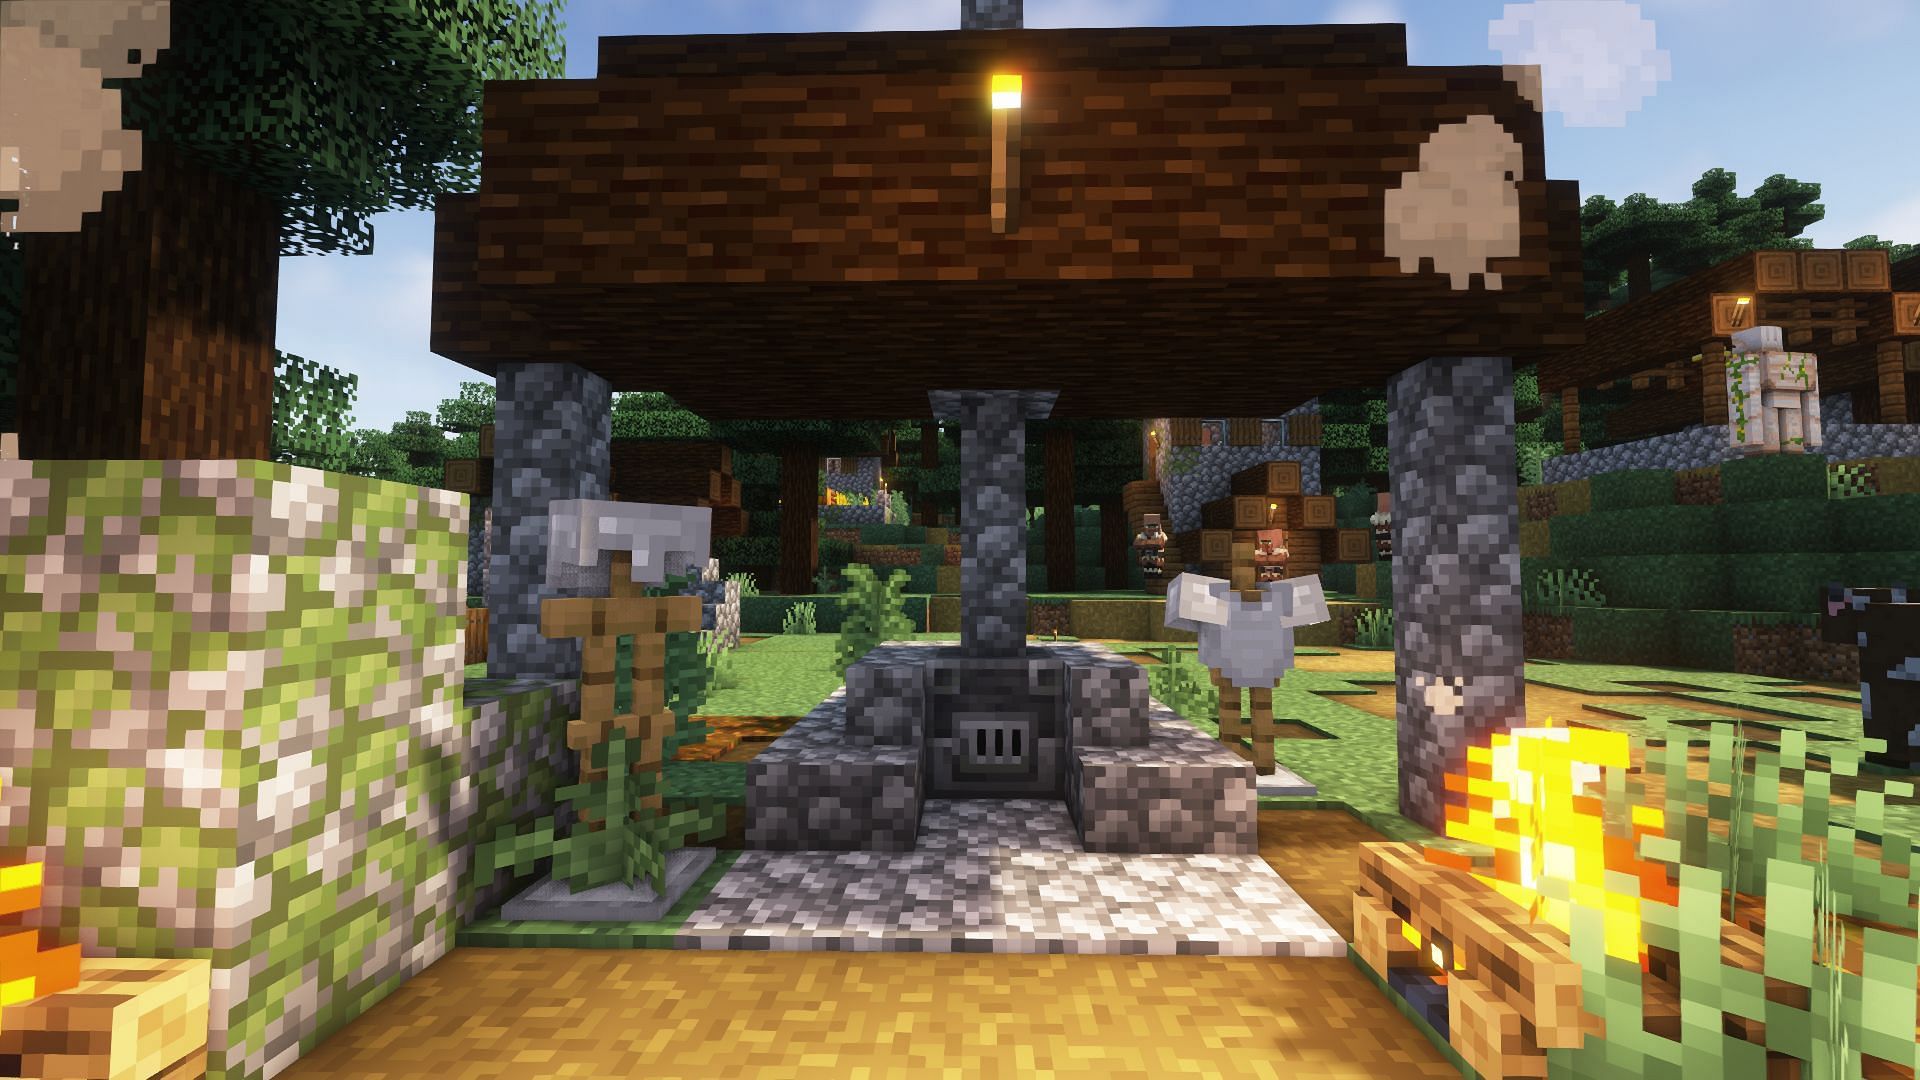 Naturally generated armor stands in a taiga biome village (Image via Mojang)